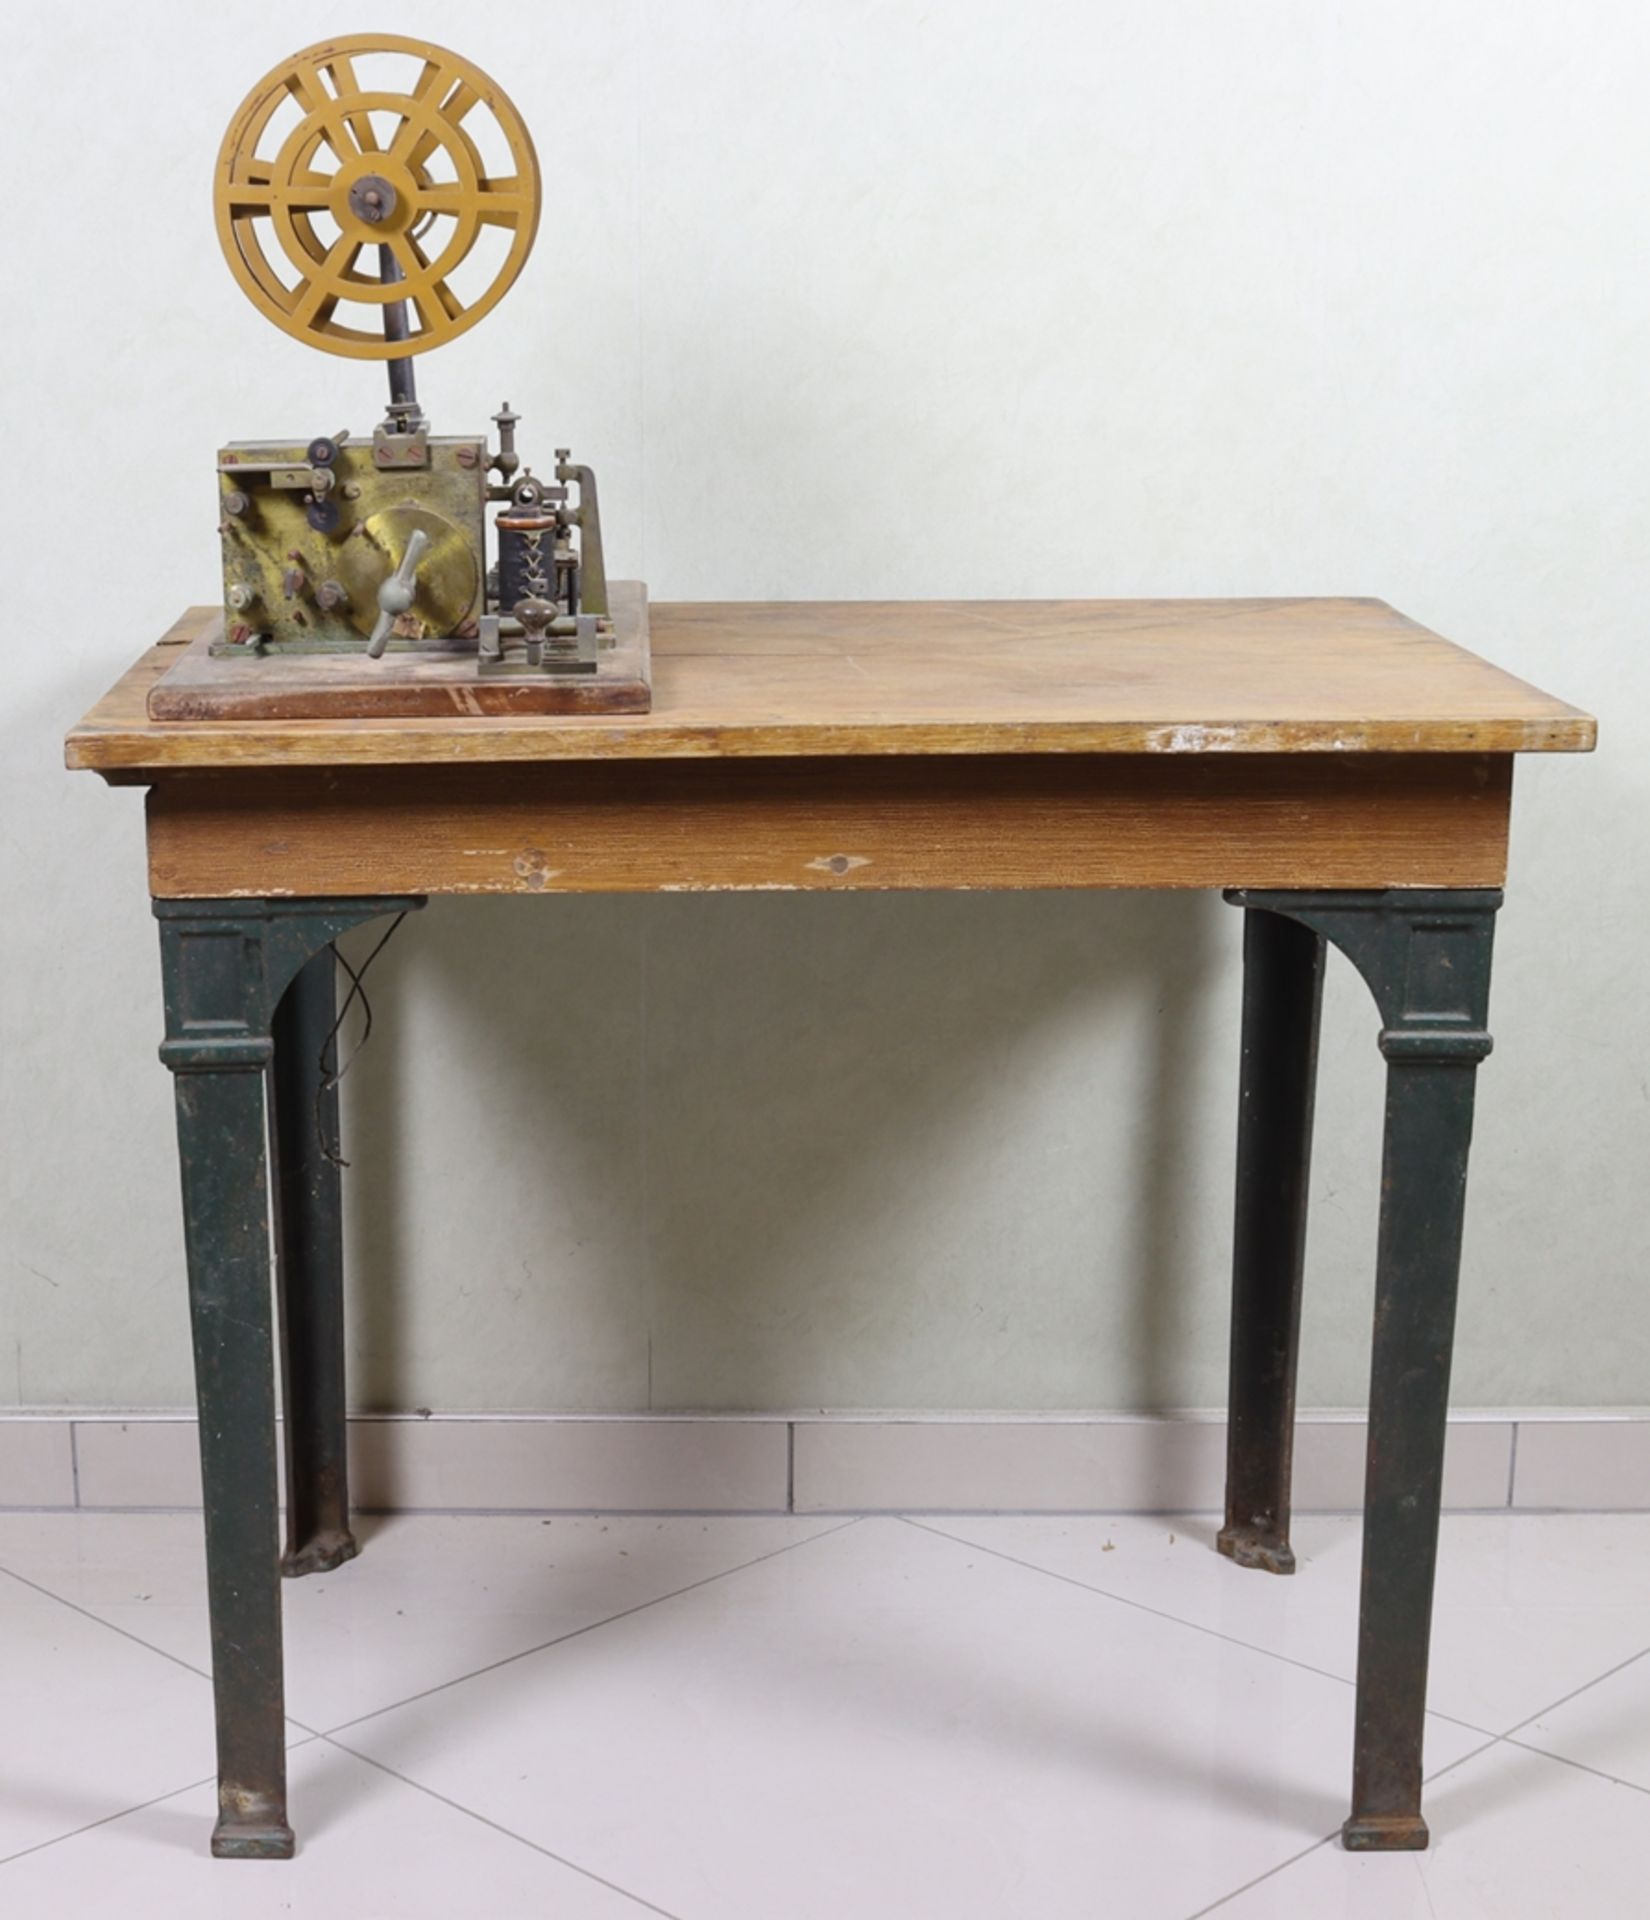 Telegraph apparatus with table, Historicism mid 19th century, German